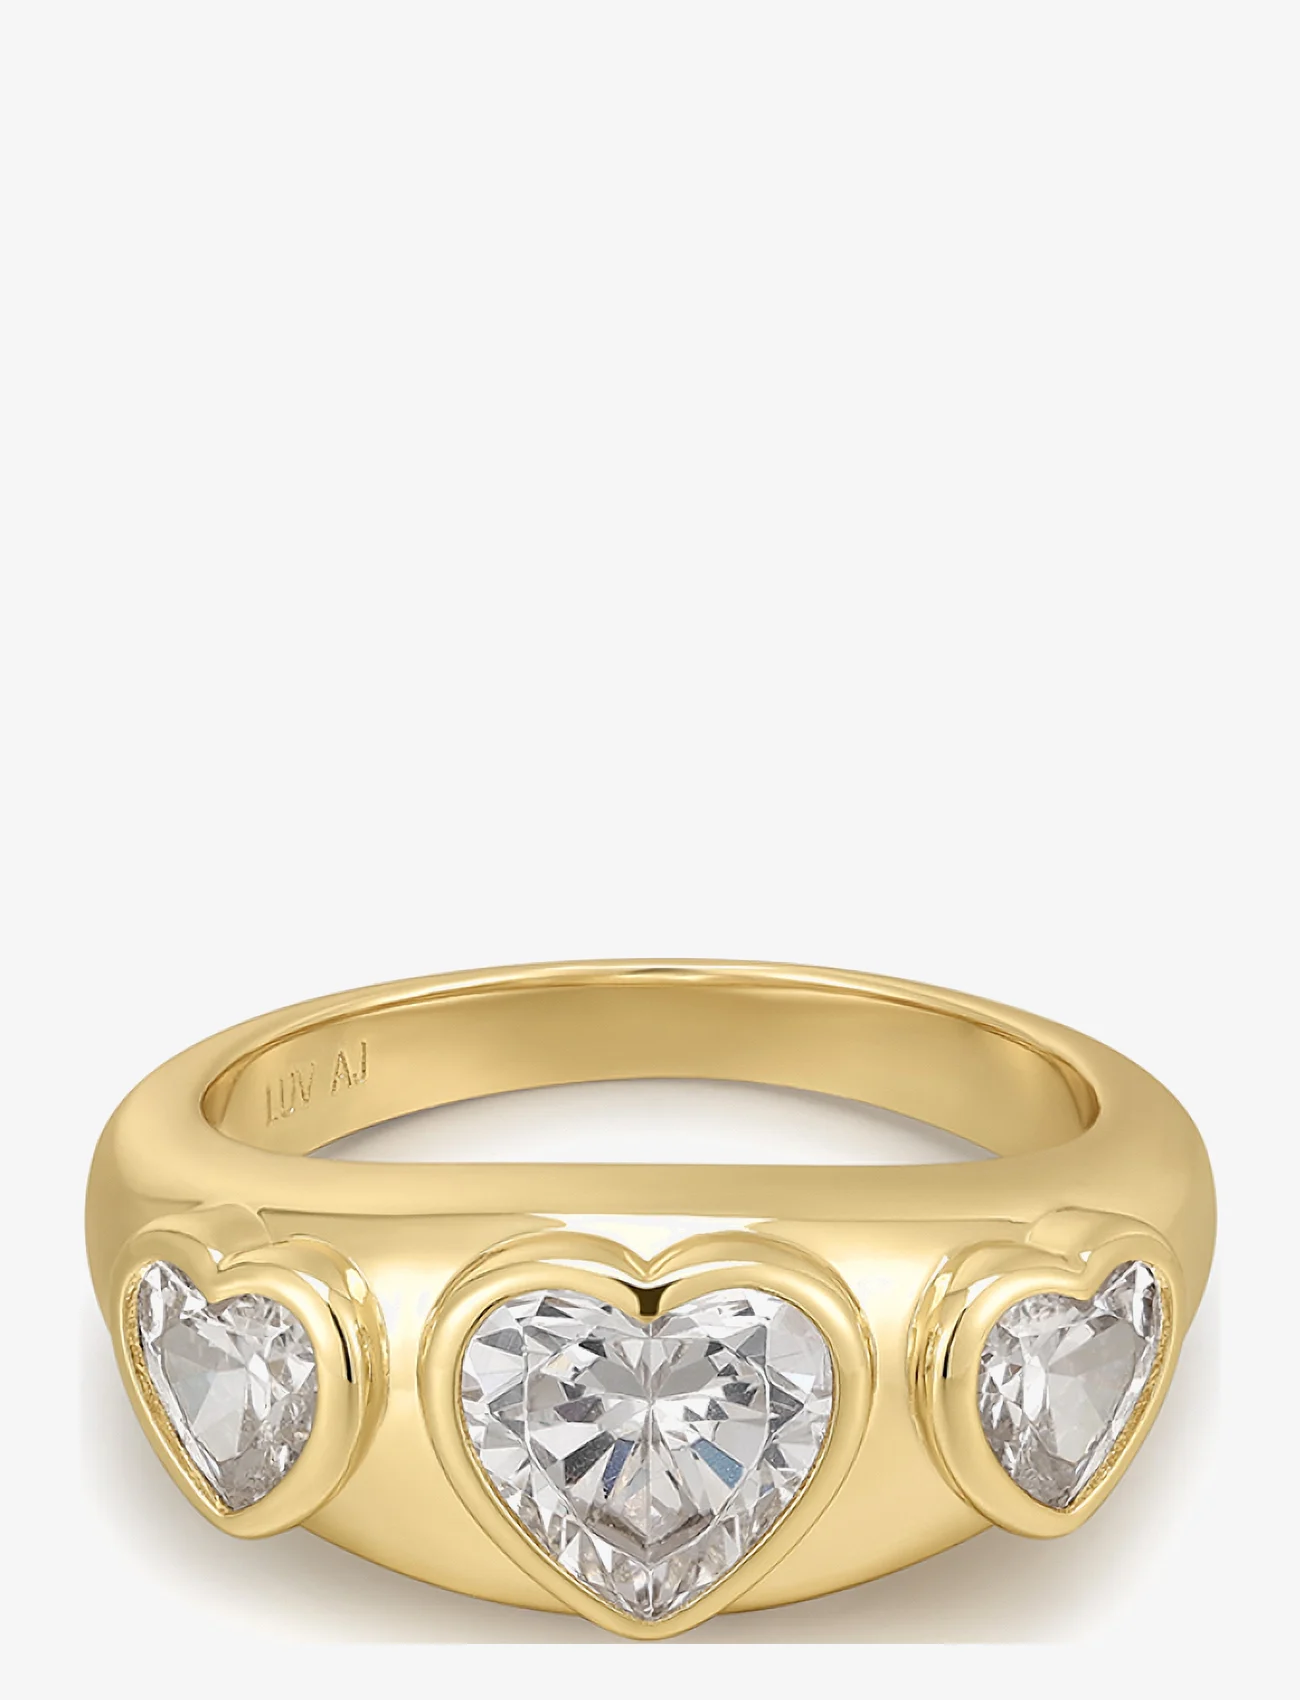 LUV AJ - The Bezel Heart Signet Ring- Gold- Size 8 - peoriided outlet-hindadega - gold - 0